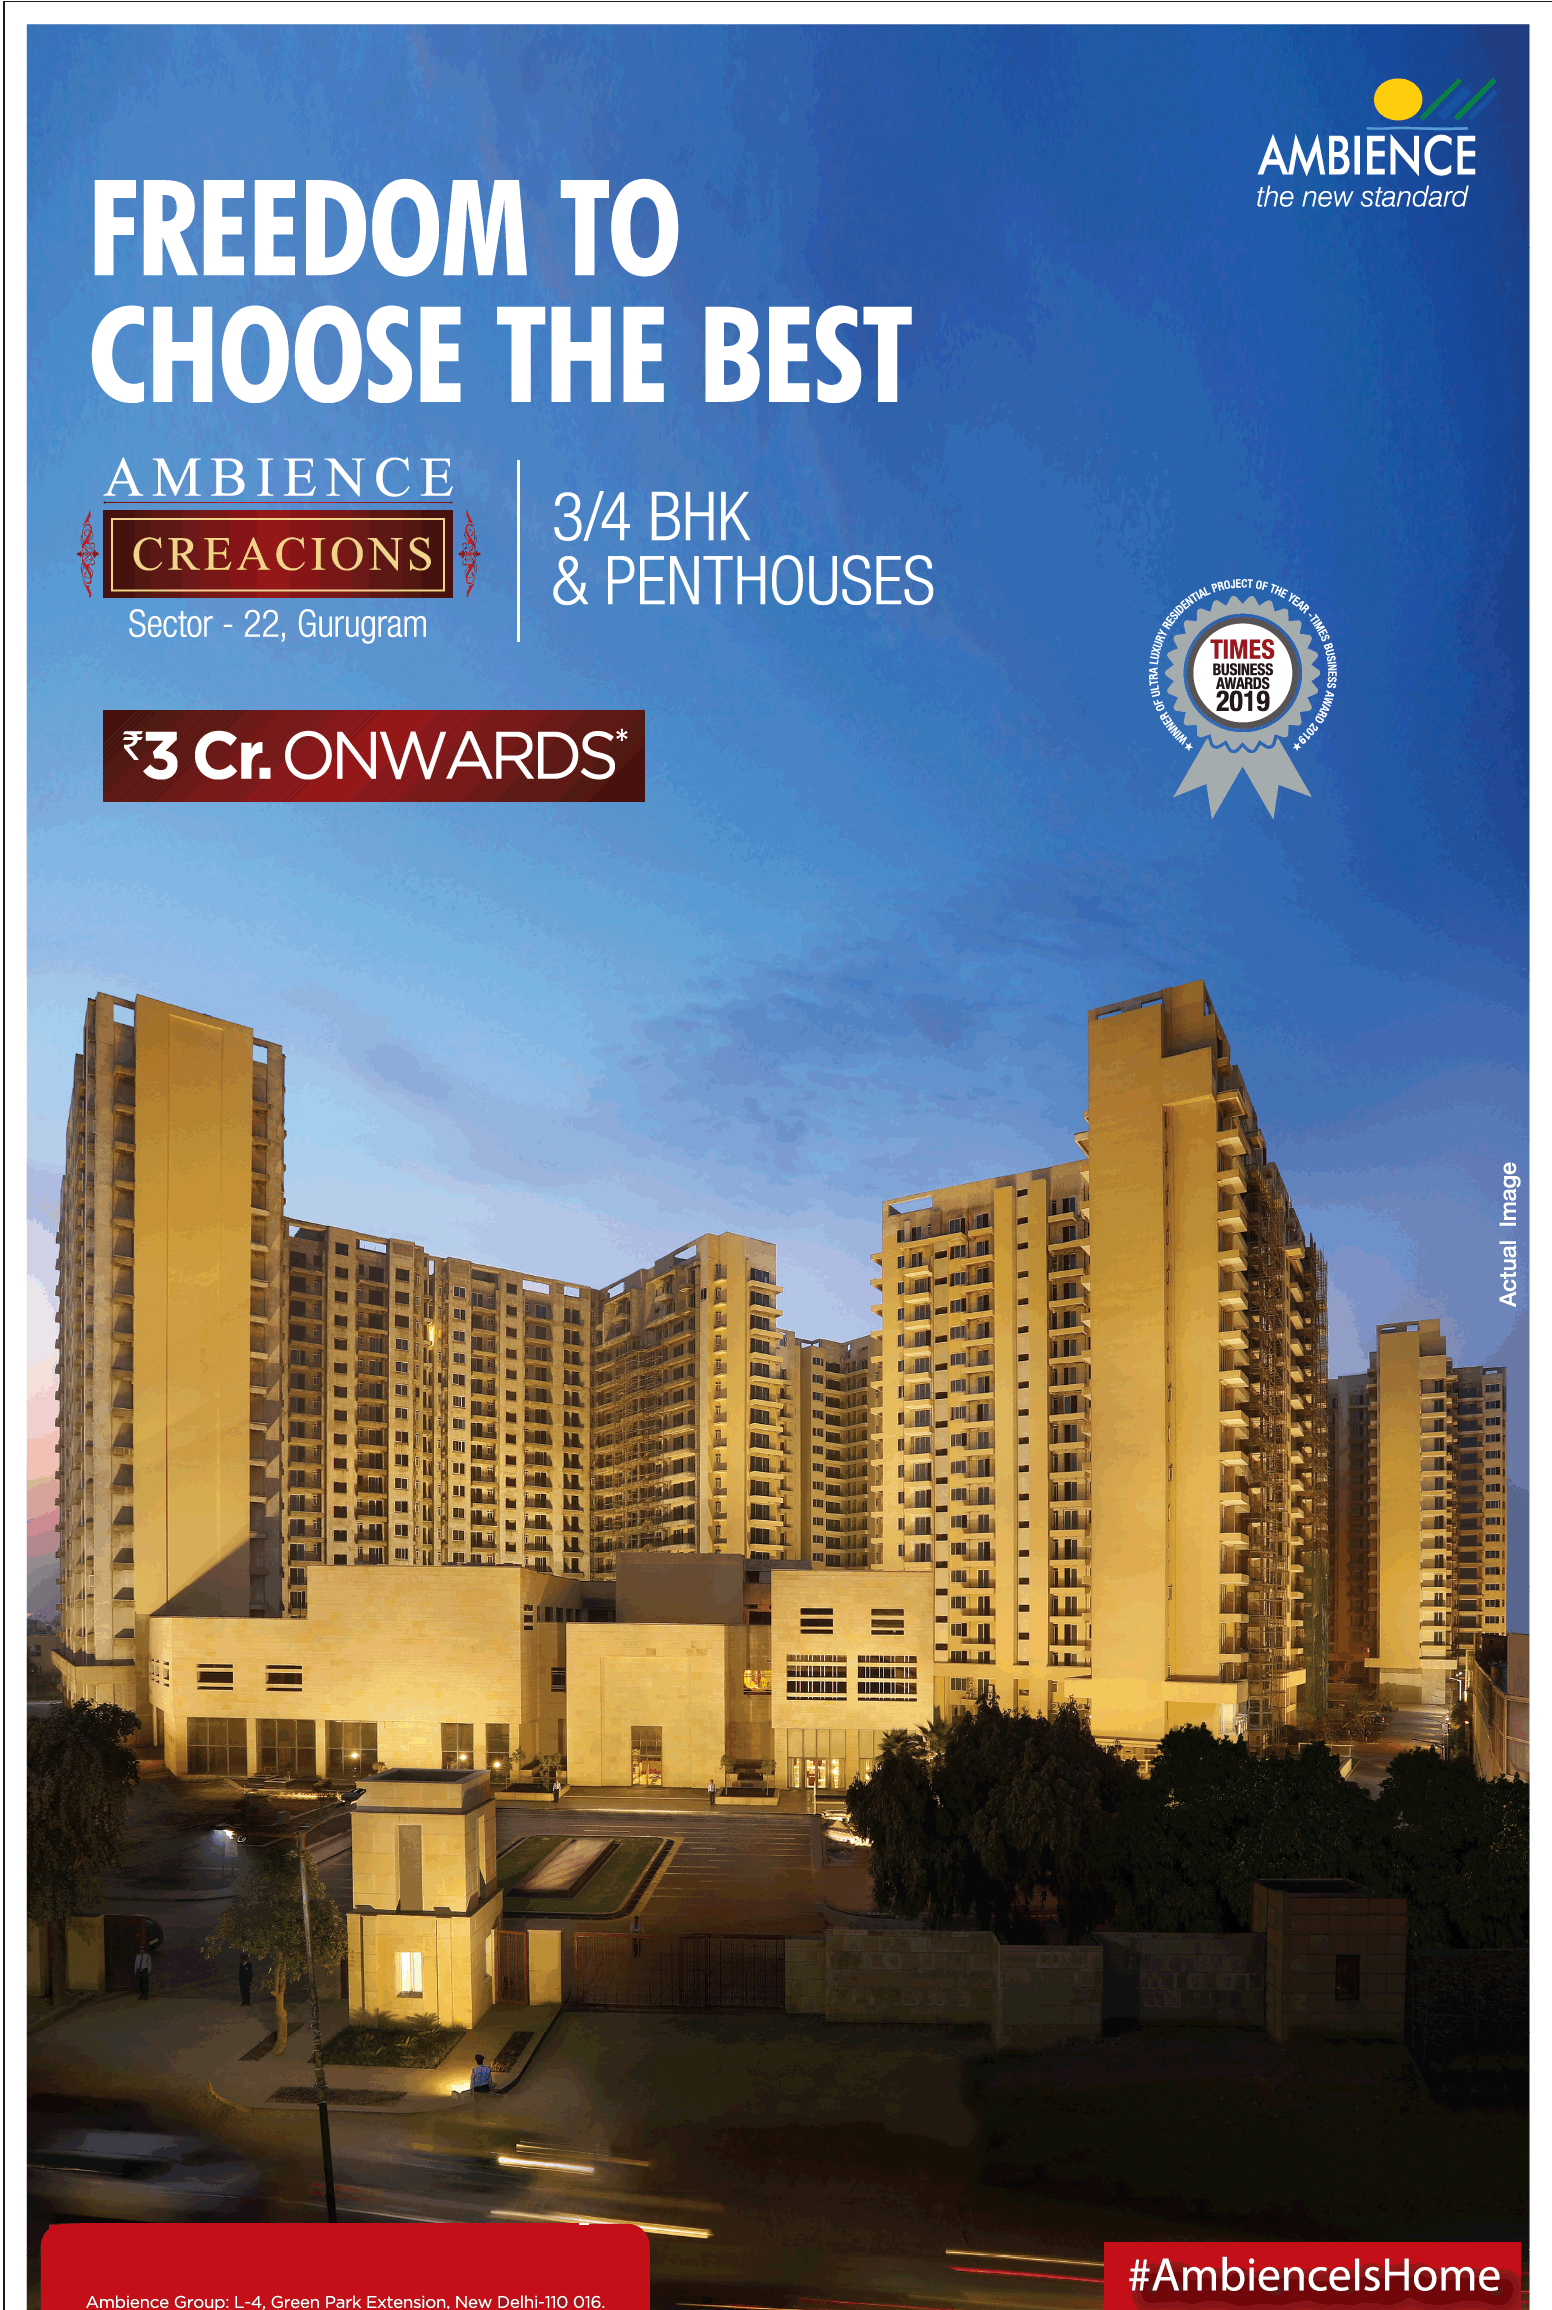 3, 4 BHK and penthouses Rs 3 Cr onwards at Ambience Creacions, Sector 22 in Gurgaon